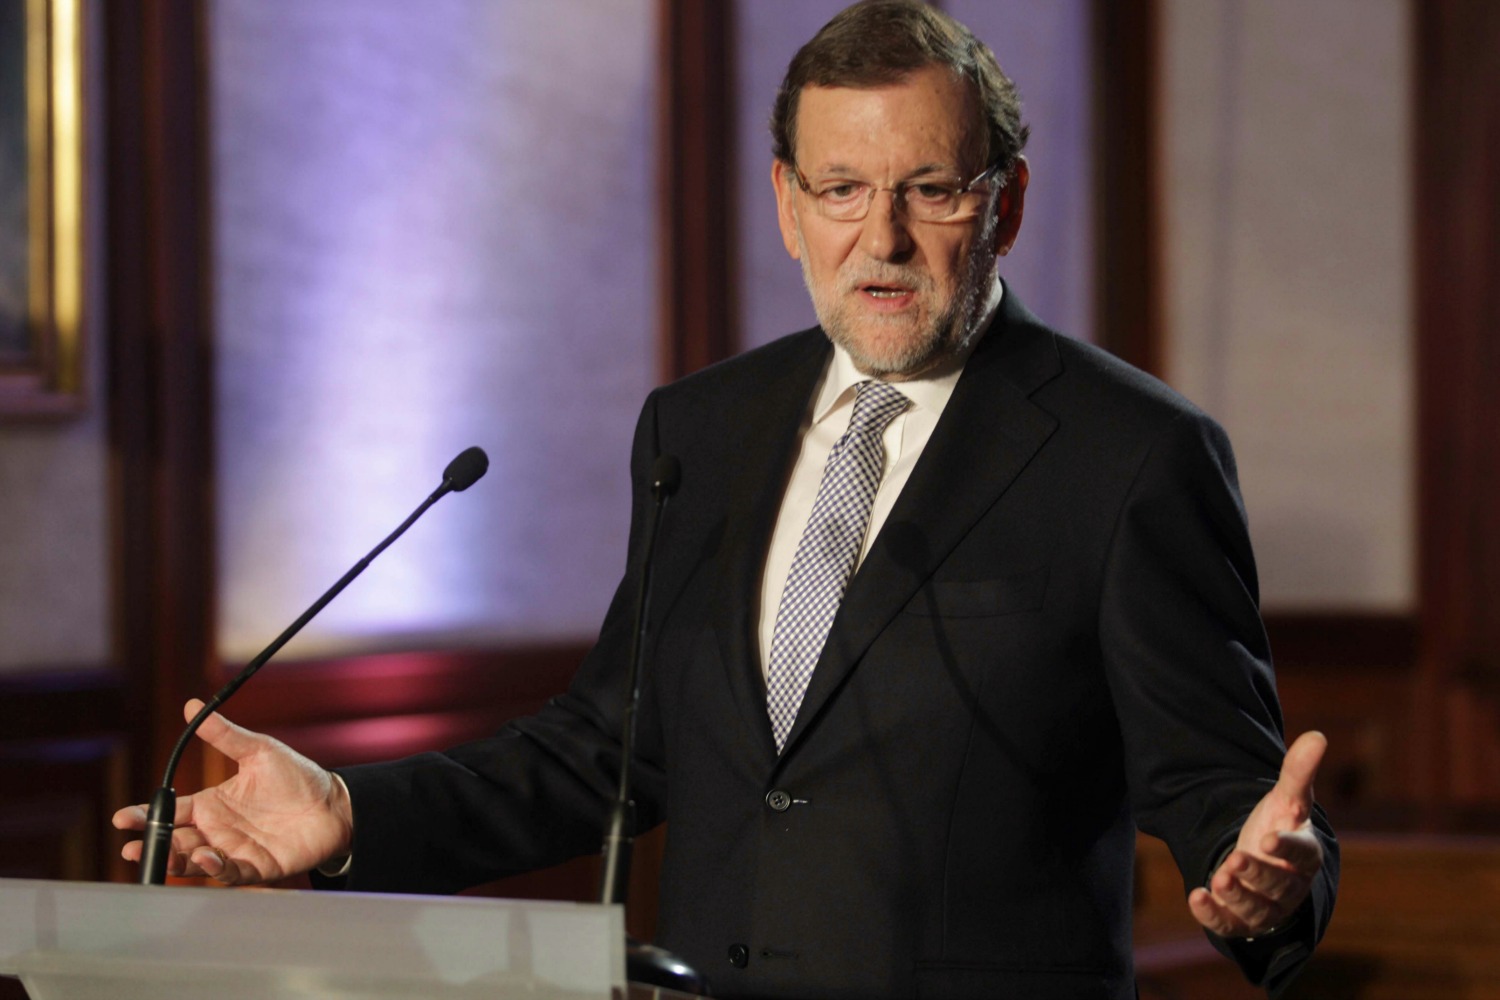 Rajoy: “Catalonia will not separate”